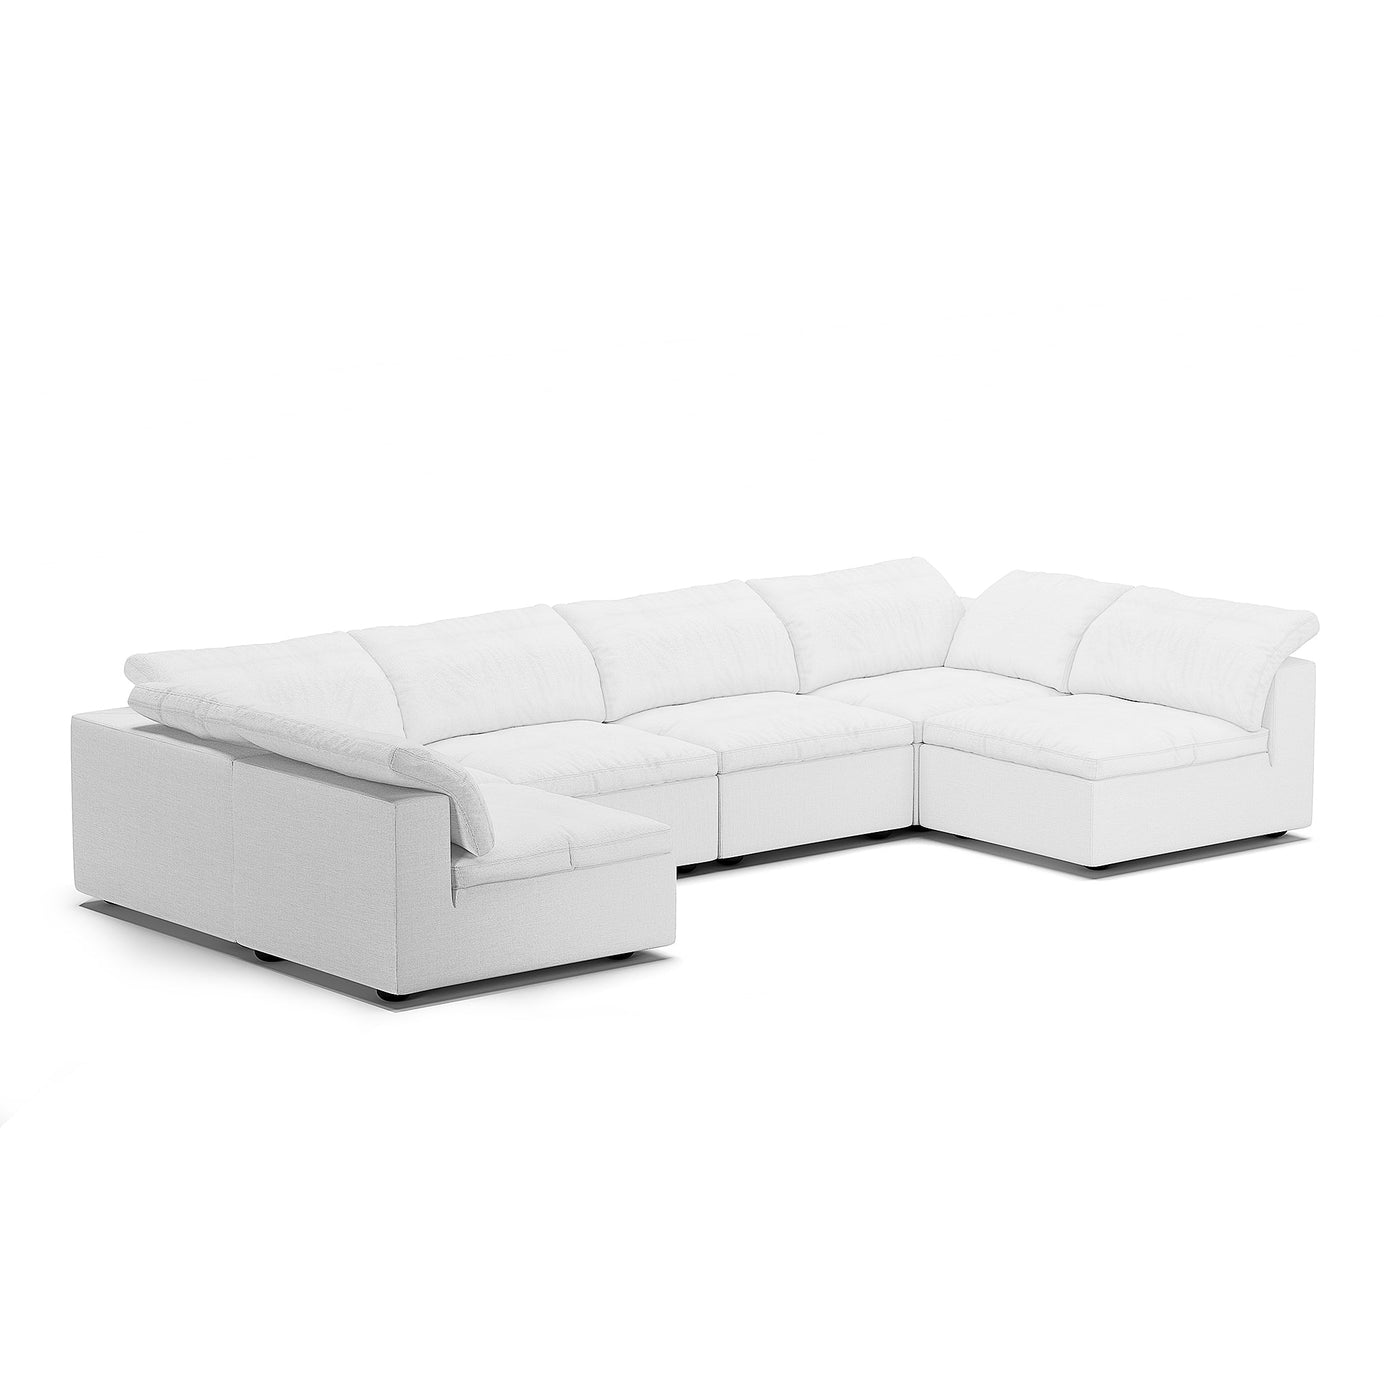 Tender Wabi Sabi Sand U Shaped Sectional with Open Ends-White-165.4"